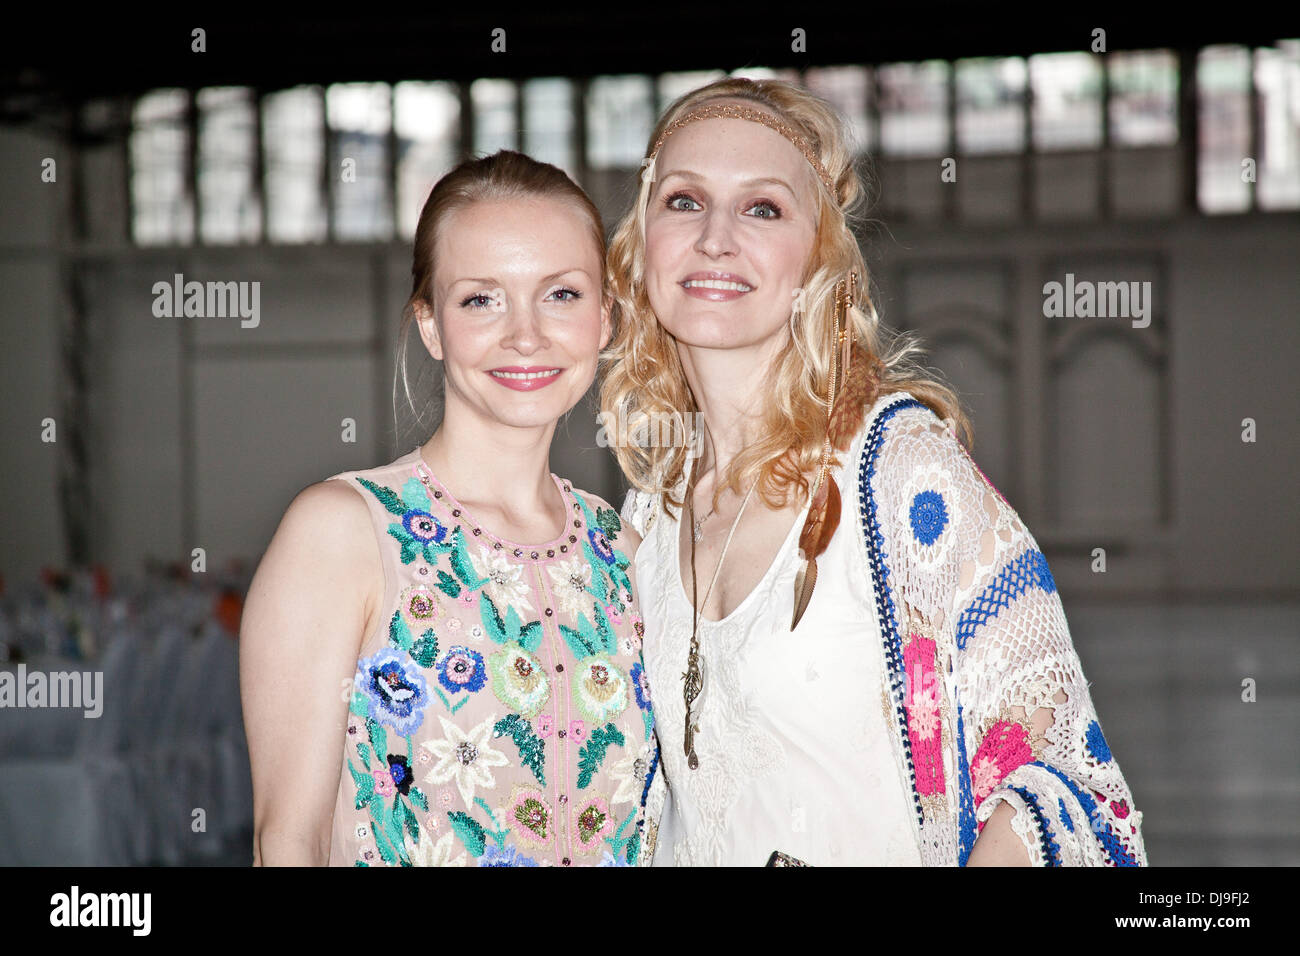 Janin Reinhardt and Anne Meyer-Minnemann at a Next Art Generation gala honoring british artist Antony Gormley at Deichtorhallen. All guests had to take off their shoes for the event. Hamburg, Germany - 25.04.2012 Stock Photo